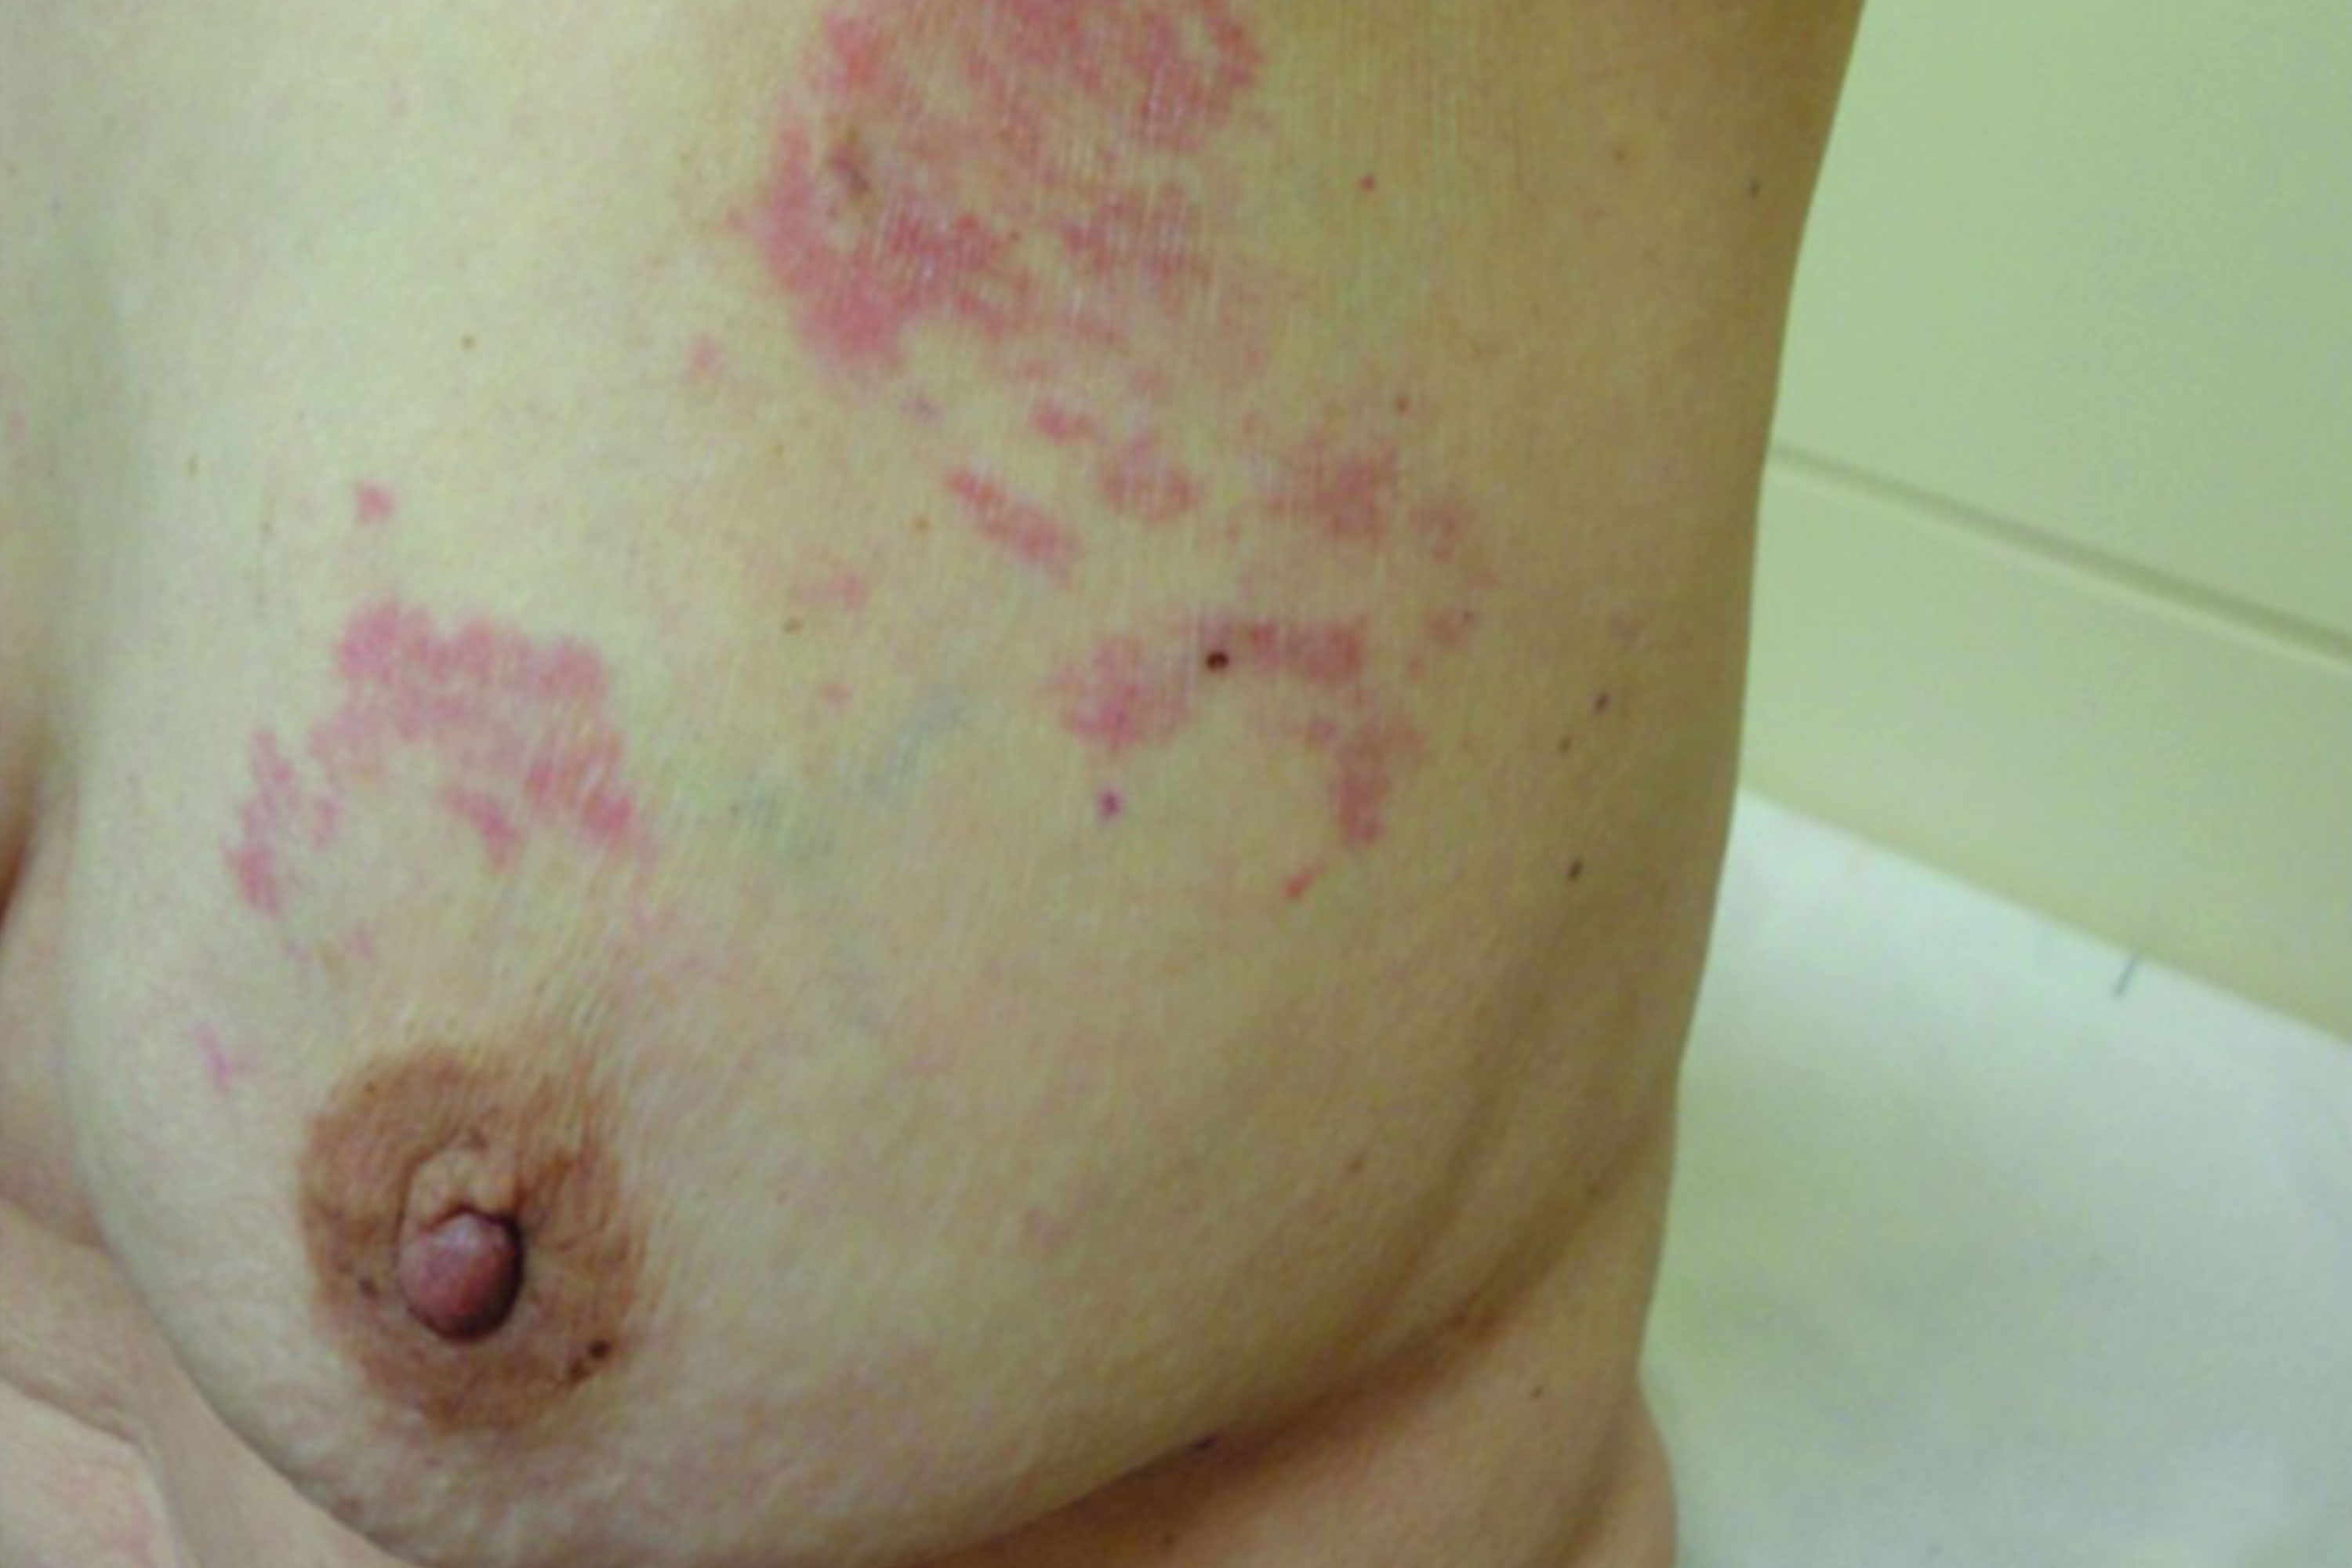 Breast Eczema: Symptoms, Causes and Treatment